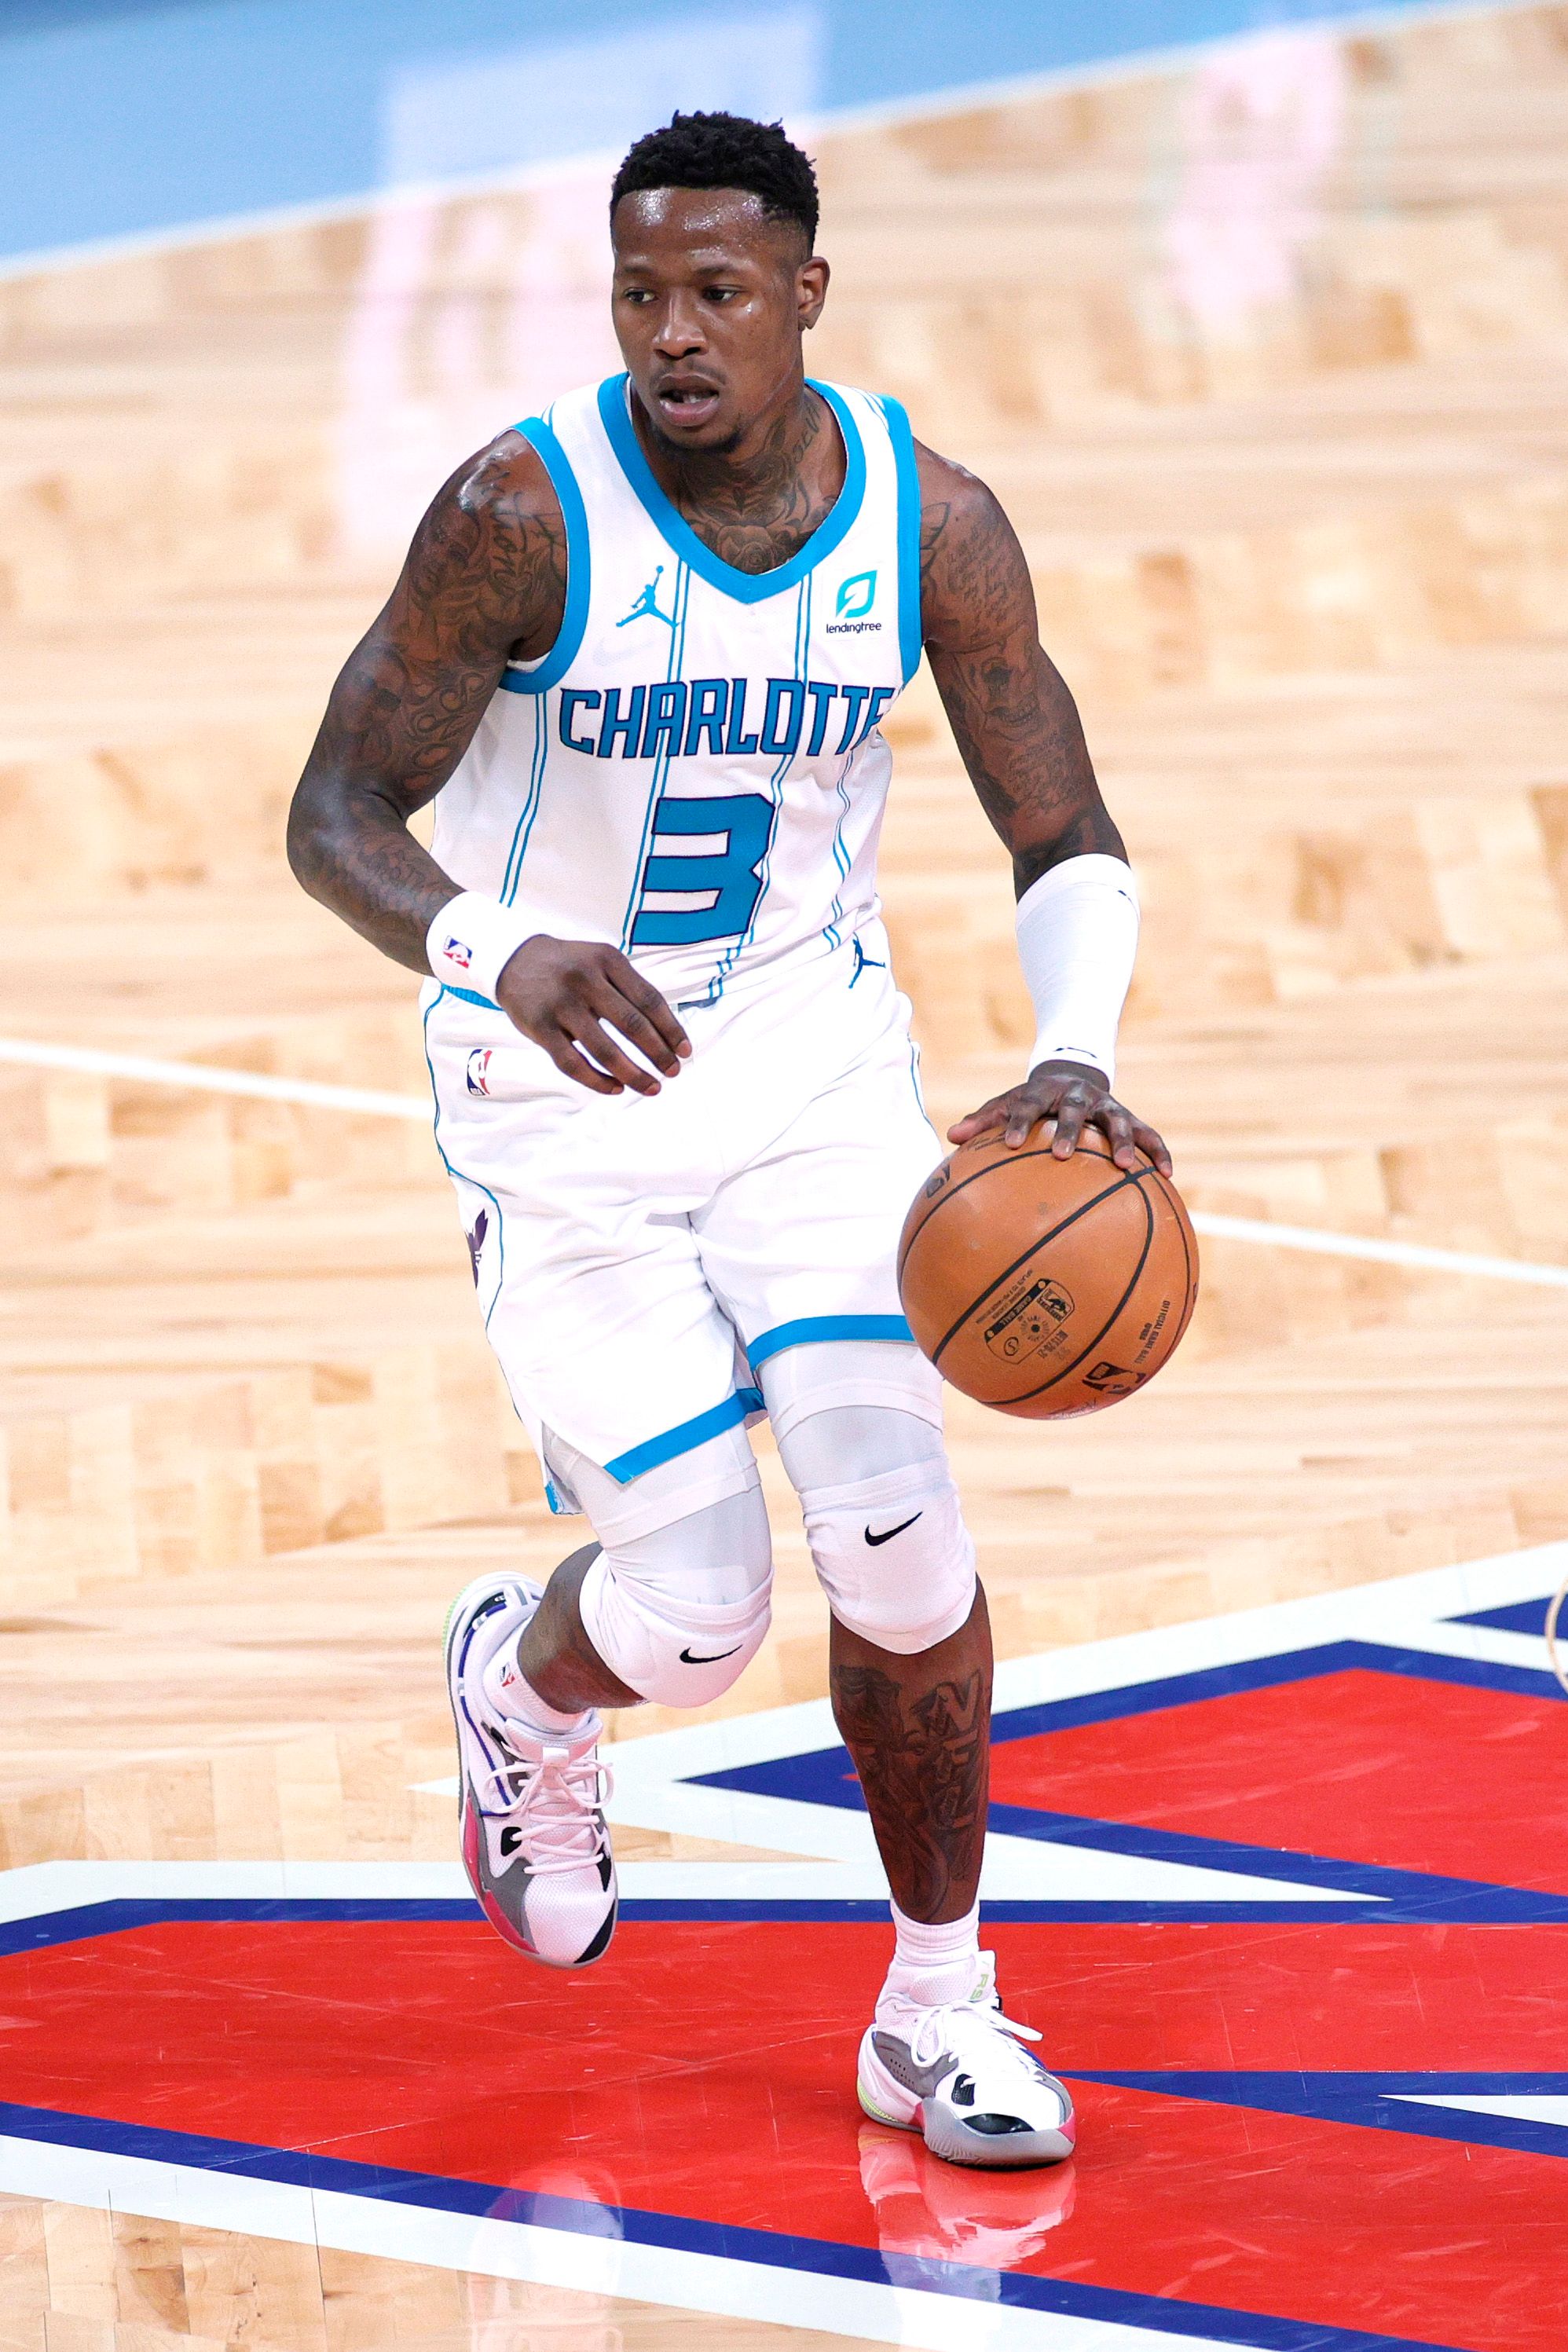 Terry Rozier making plays for the Hornets